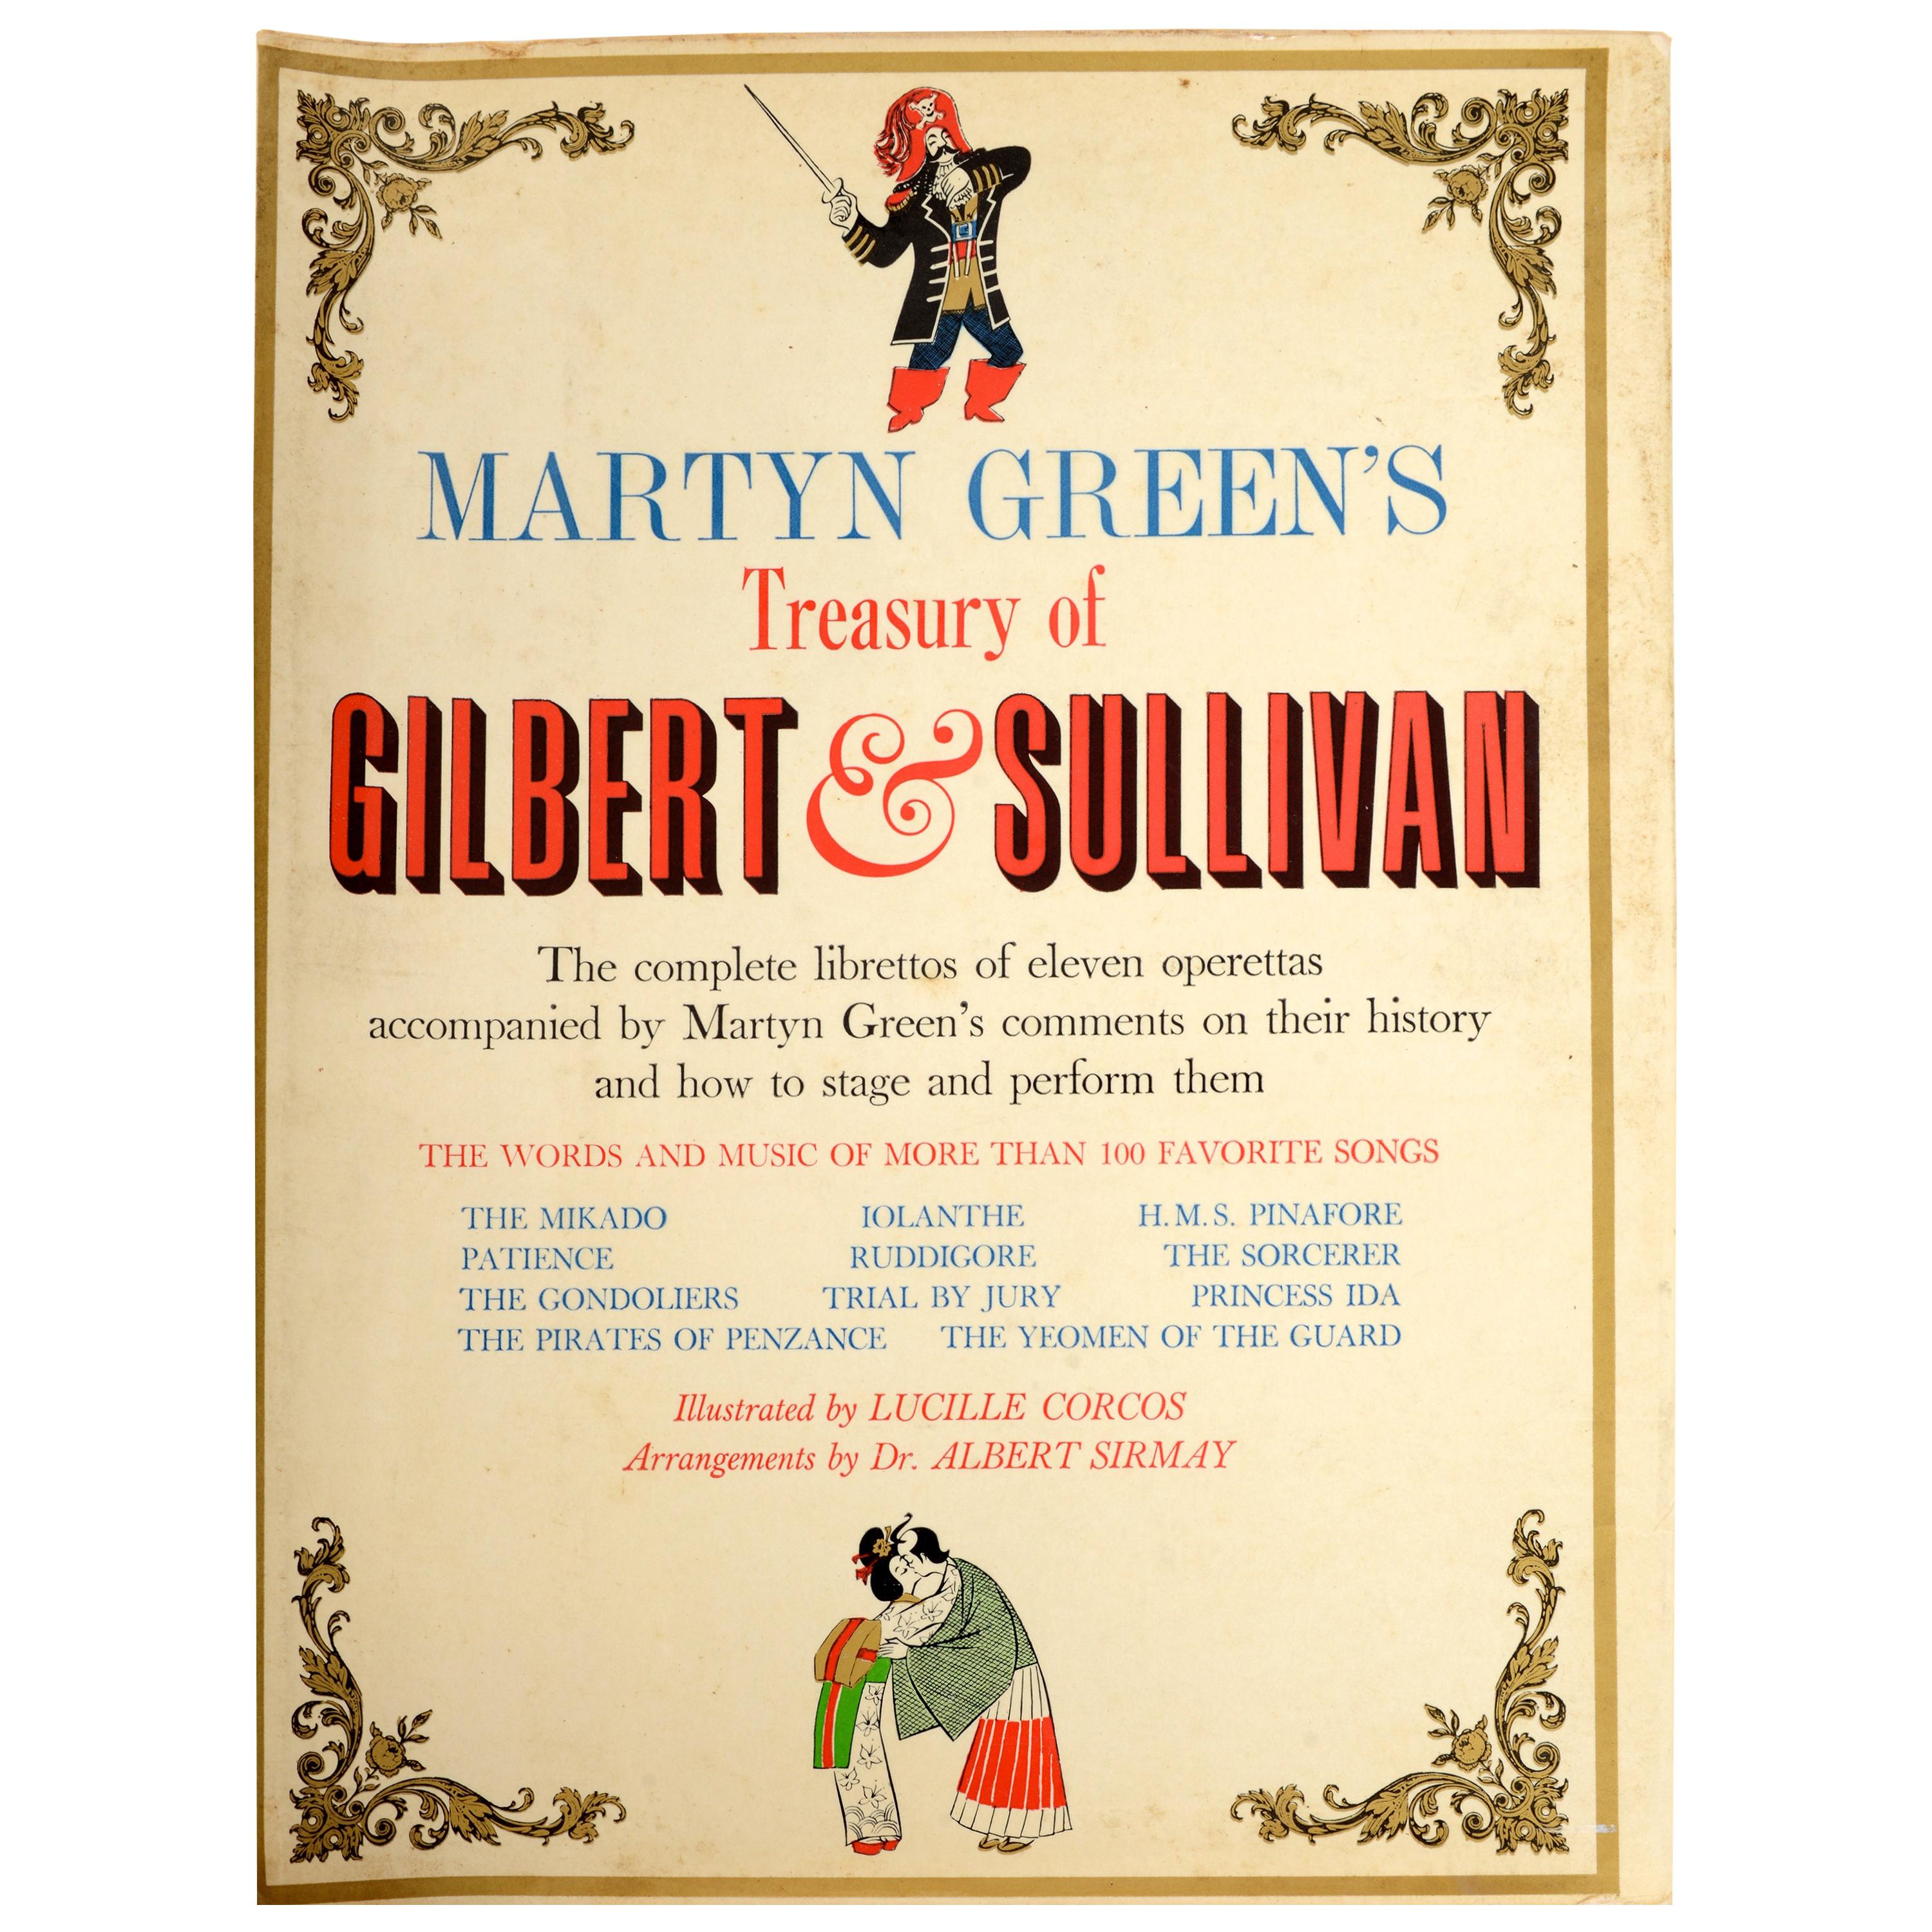 Martyn Green's Treasury of Gilbert and Sullivan, Stated 1st Printing